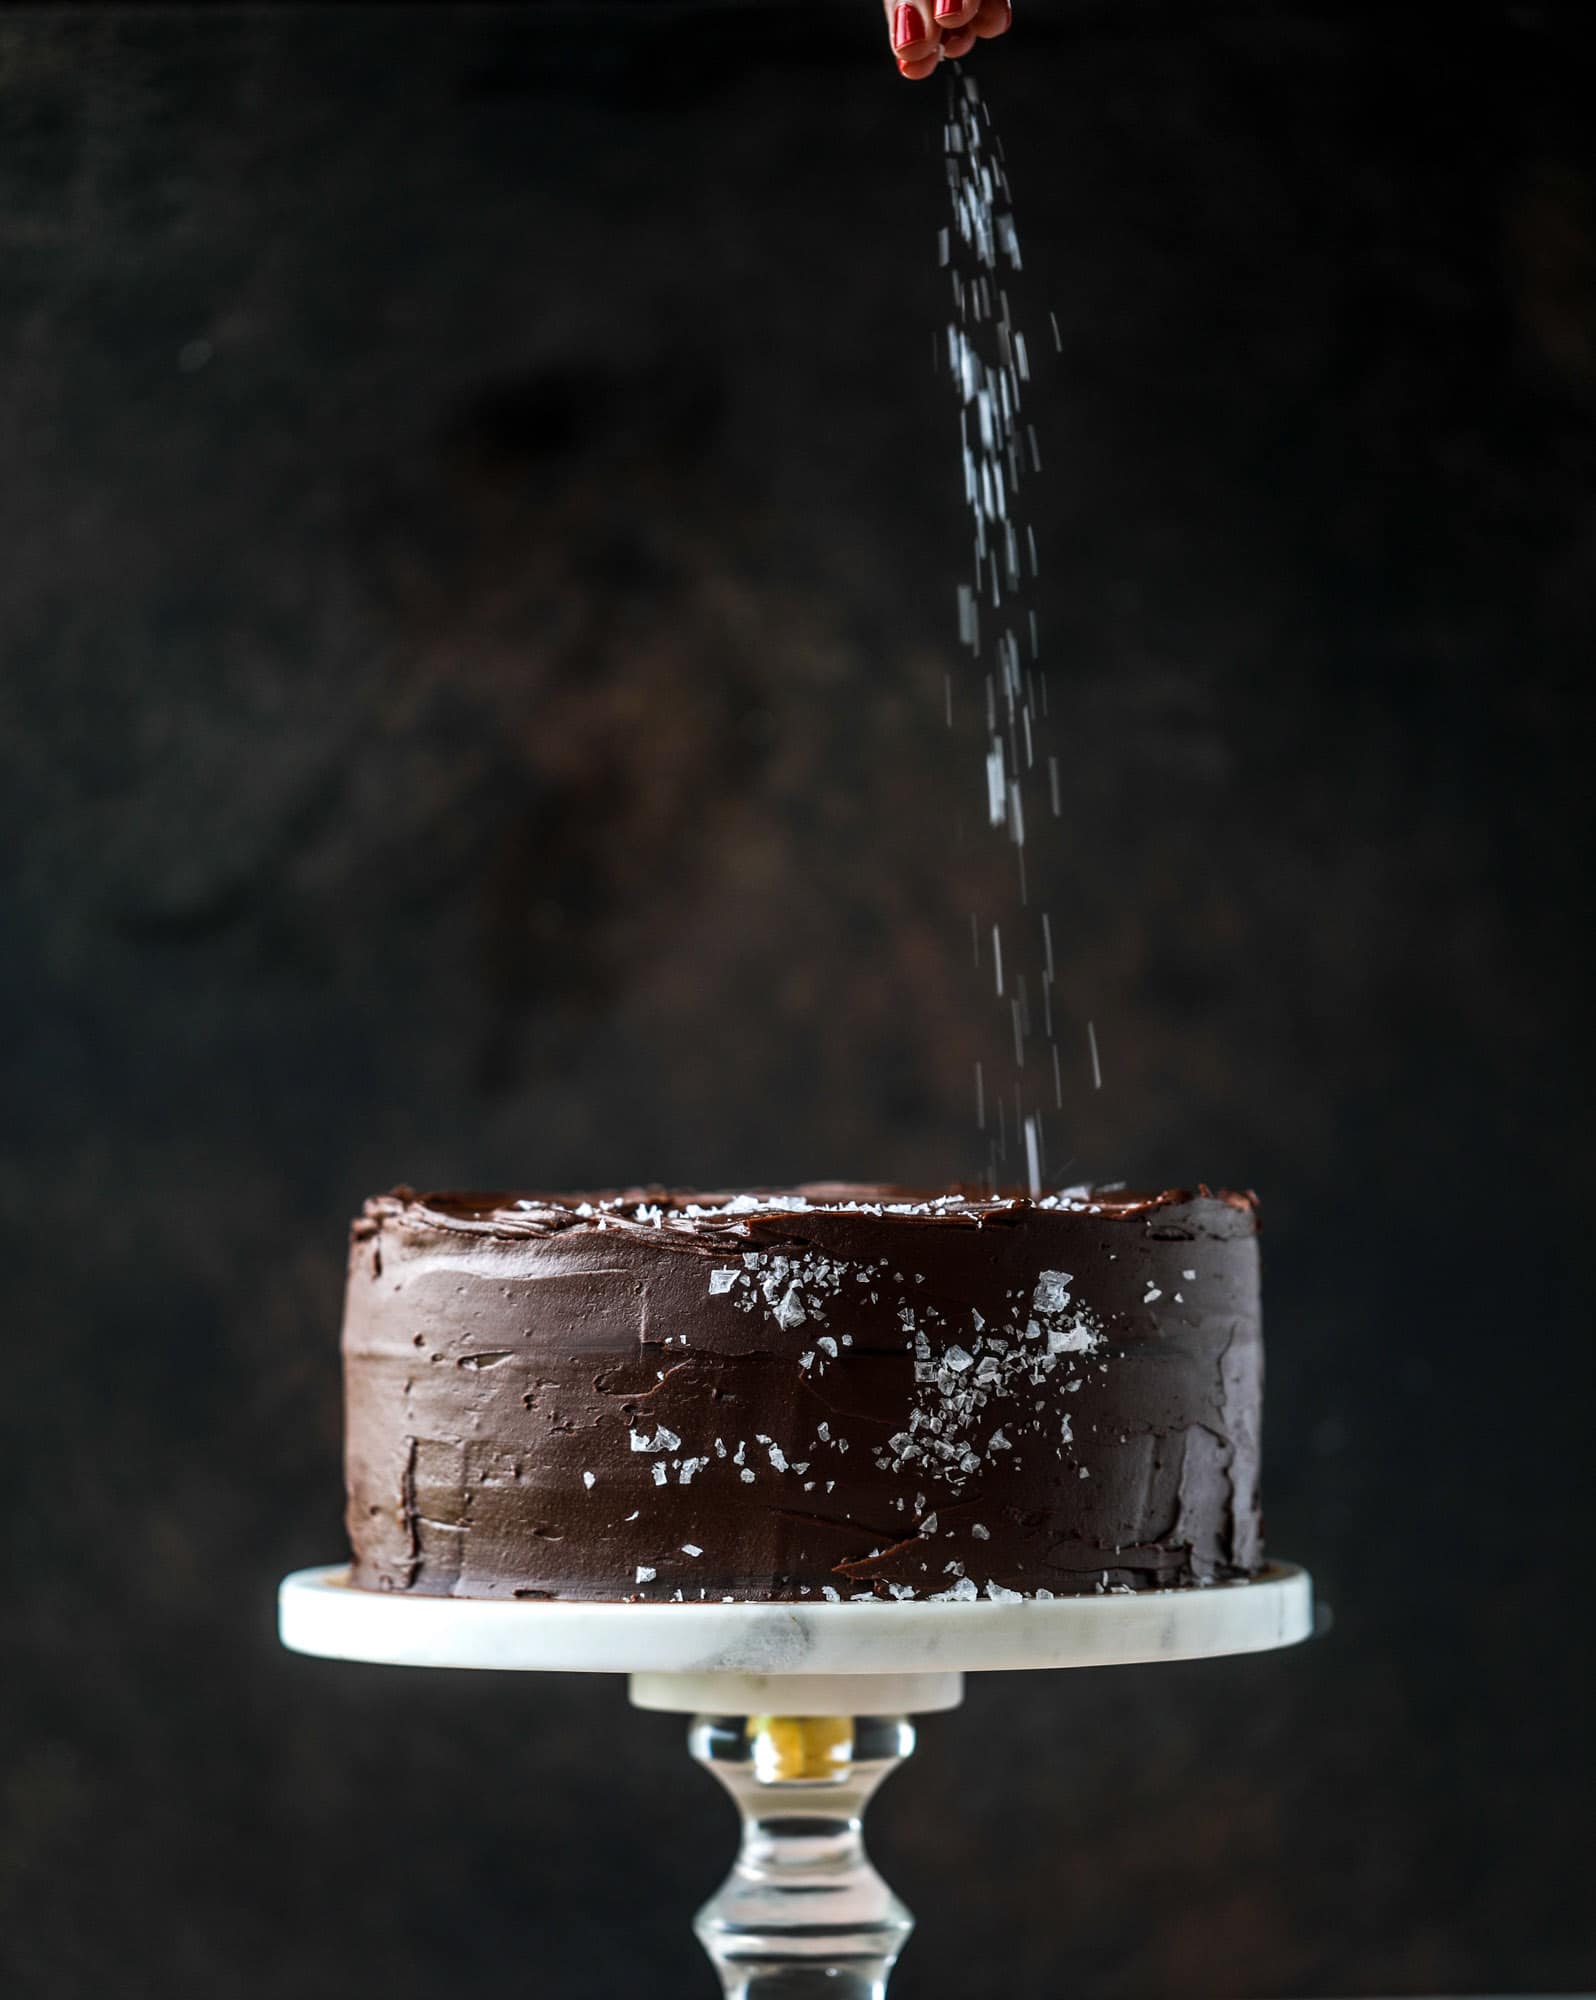 This salted dark chocolate stout cake is absolutely divine! It's ridiculously rich and perfect for a crowd or a party. Pumpkin stout batter is baked into fluffy laters and covered in a super fudgy chocolate ganache. Perfect for chocolate lovers! I howsweeteats.com #dark #chocolate #stout #cake #salted